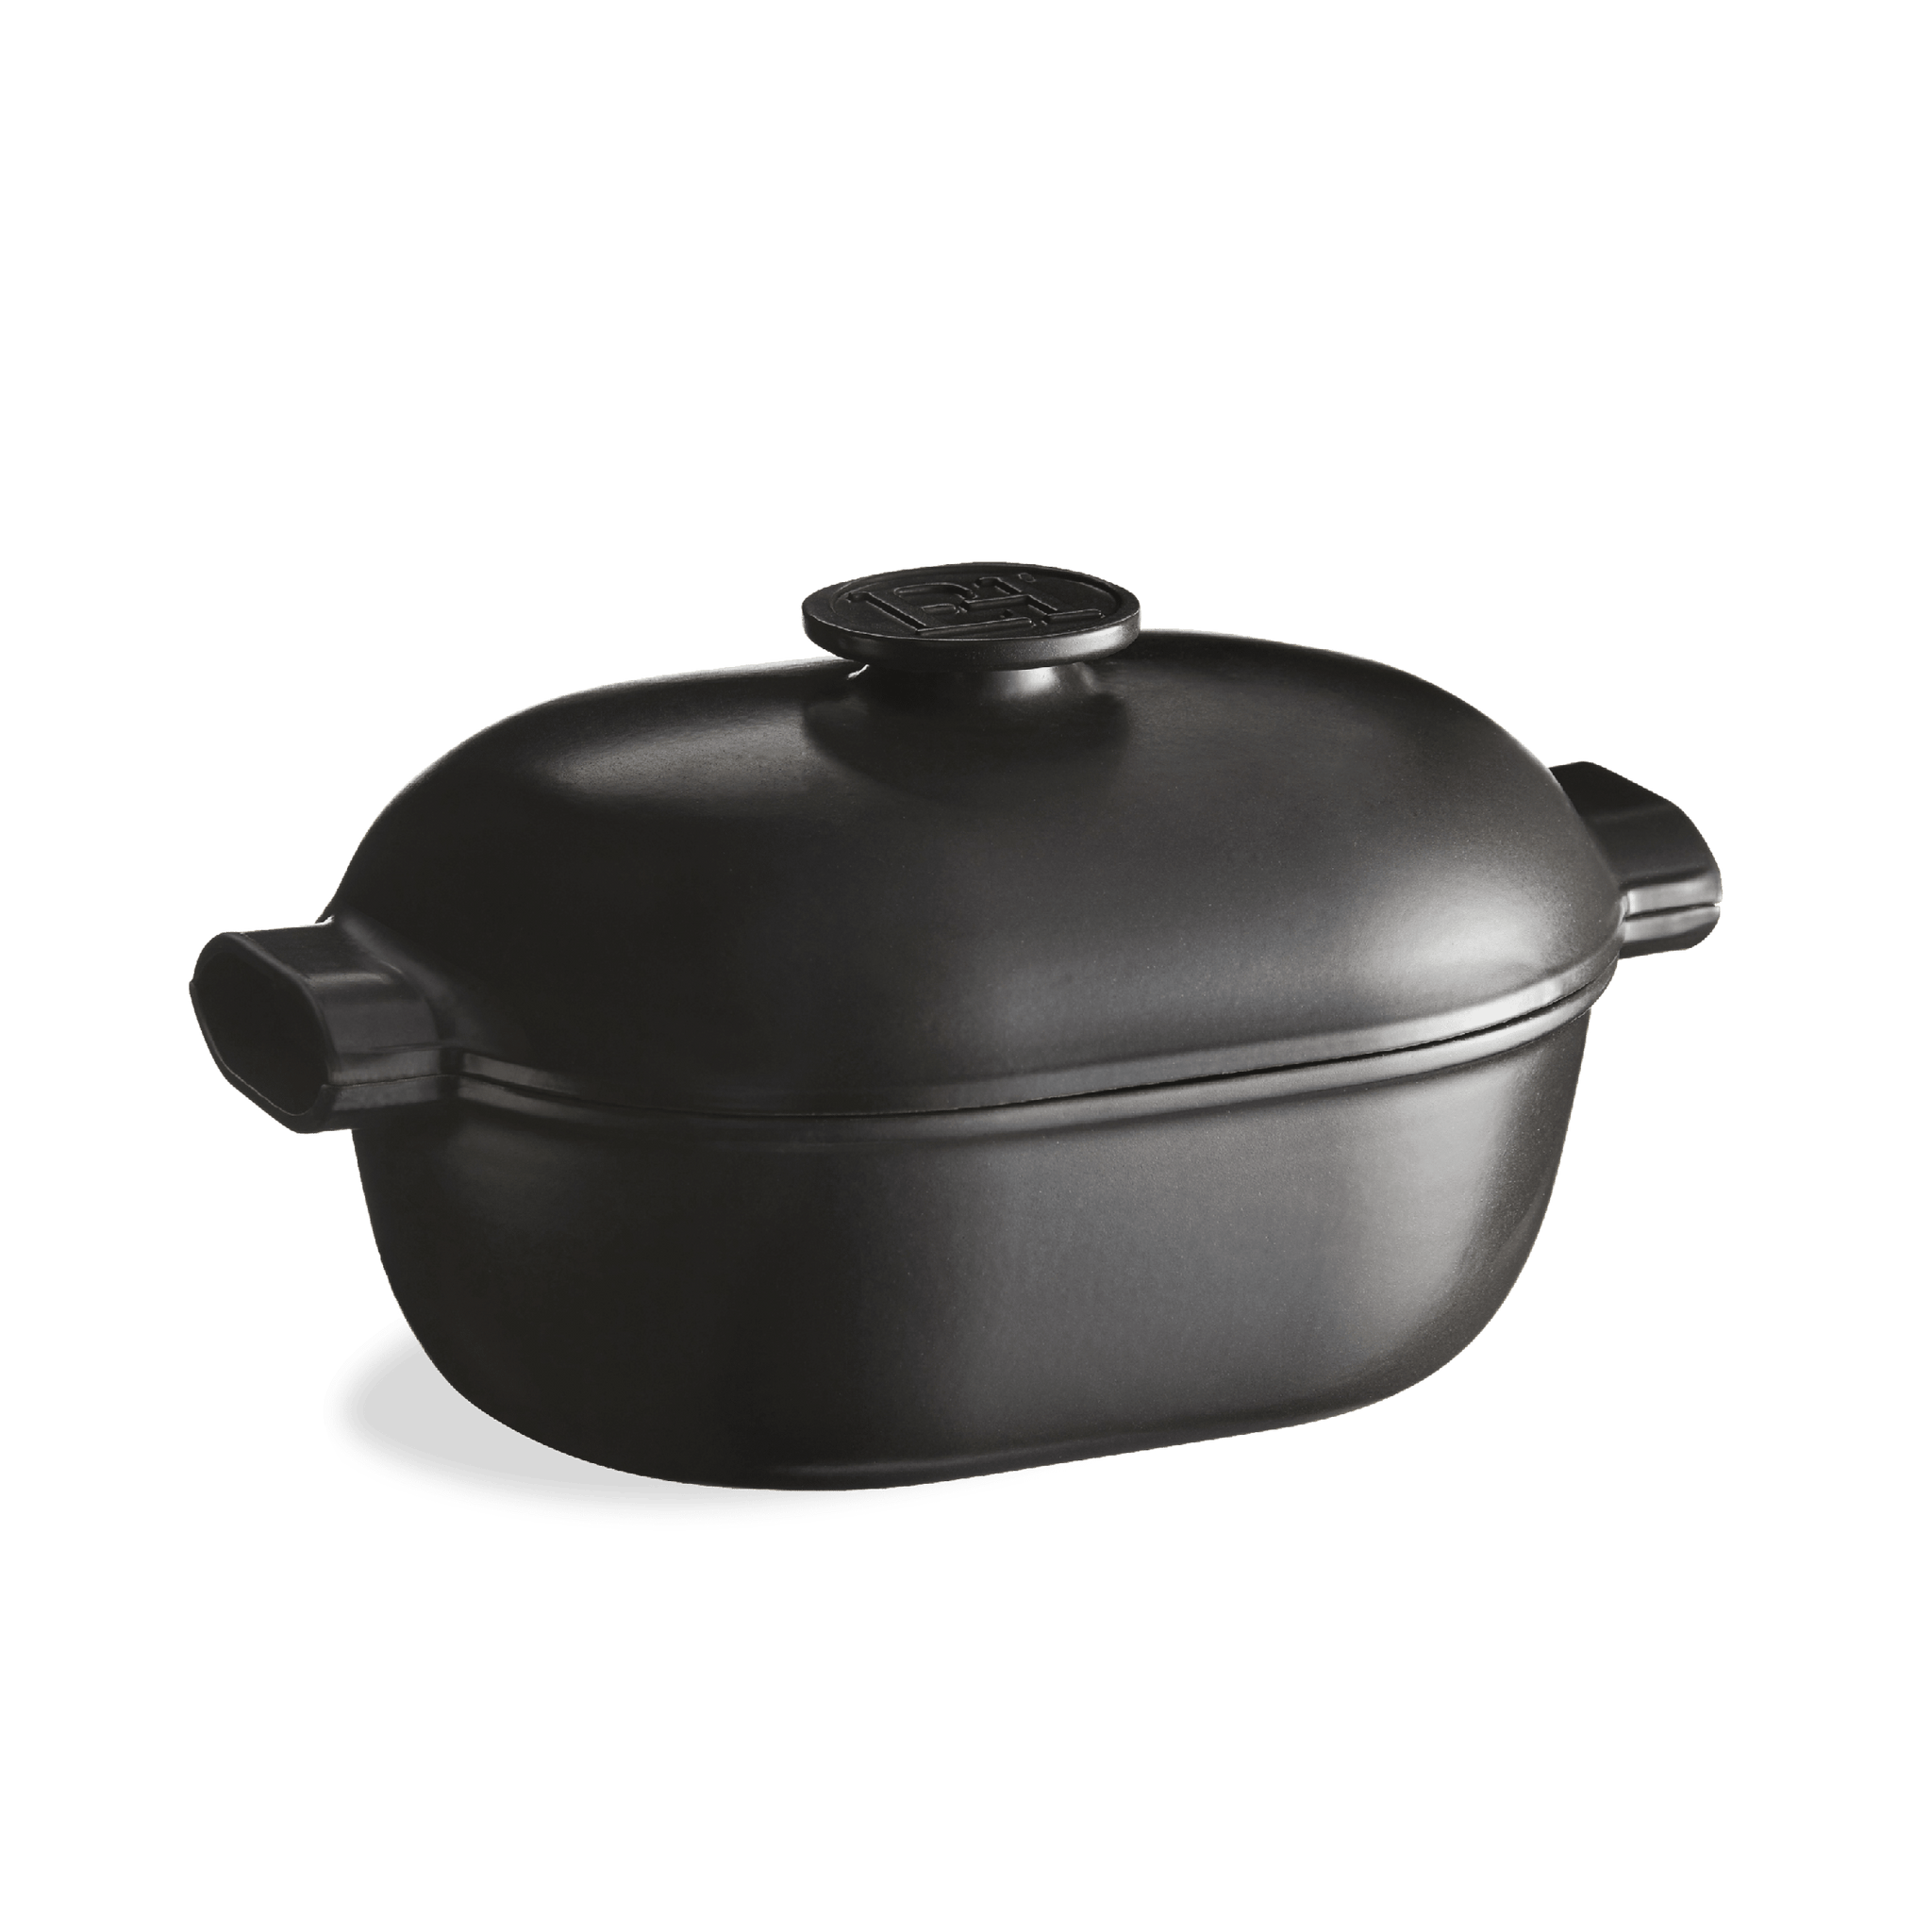 Le Creuset Oval Dutch Oven with Grill Pan Lid 4.75 Qt